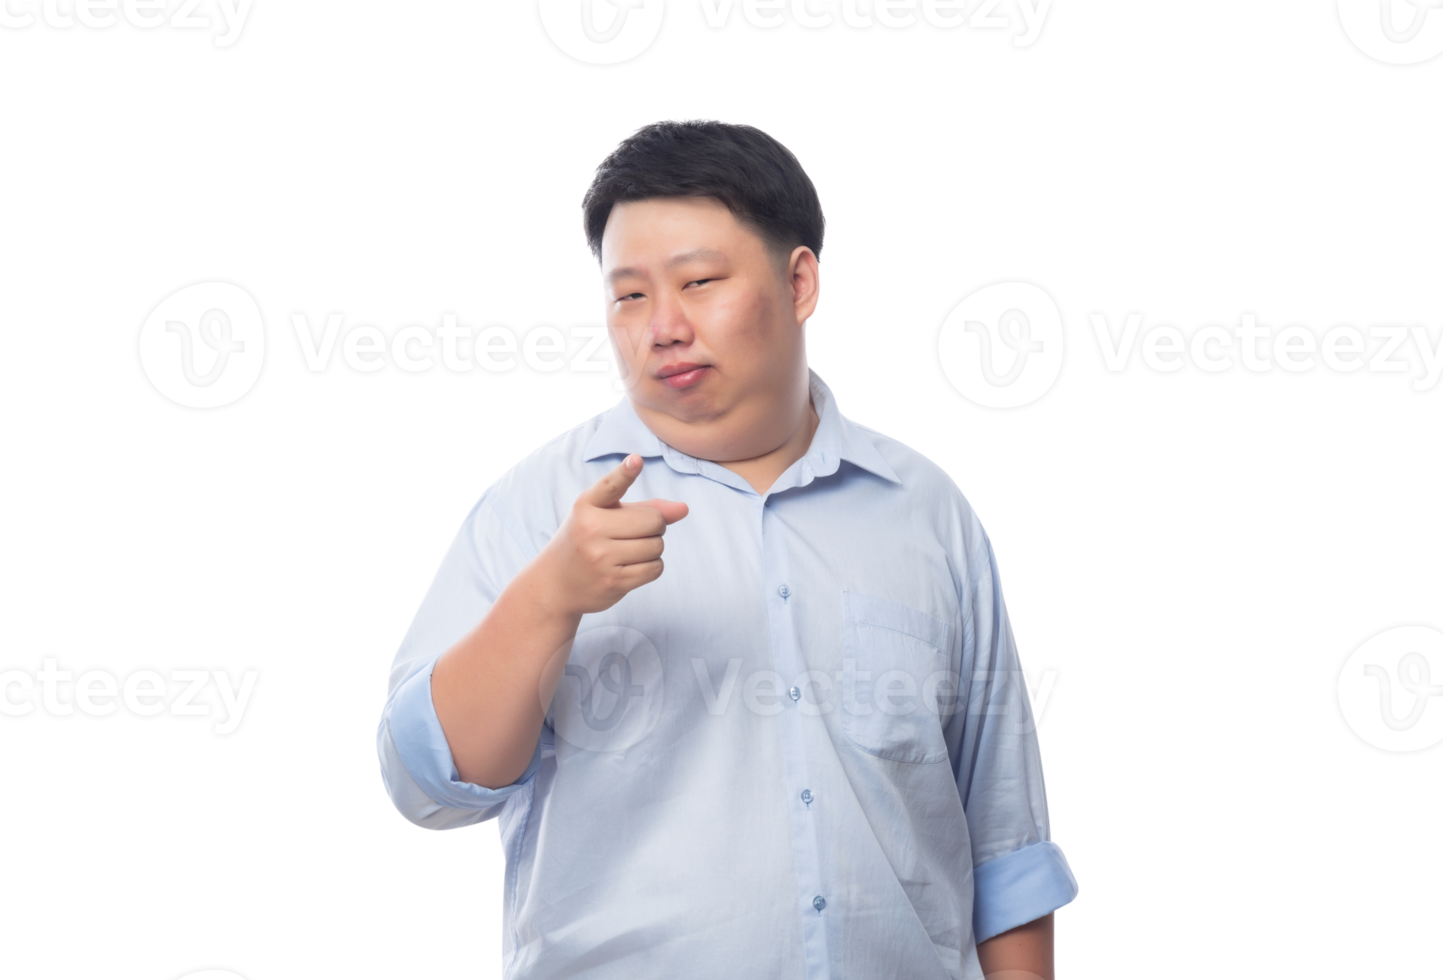 Asian business fat man, Png file